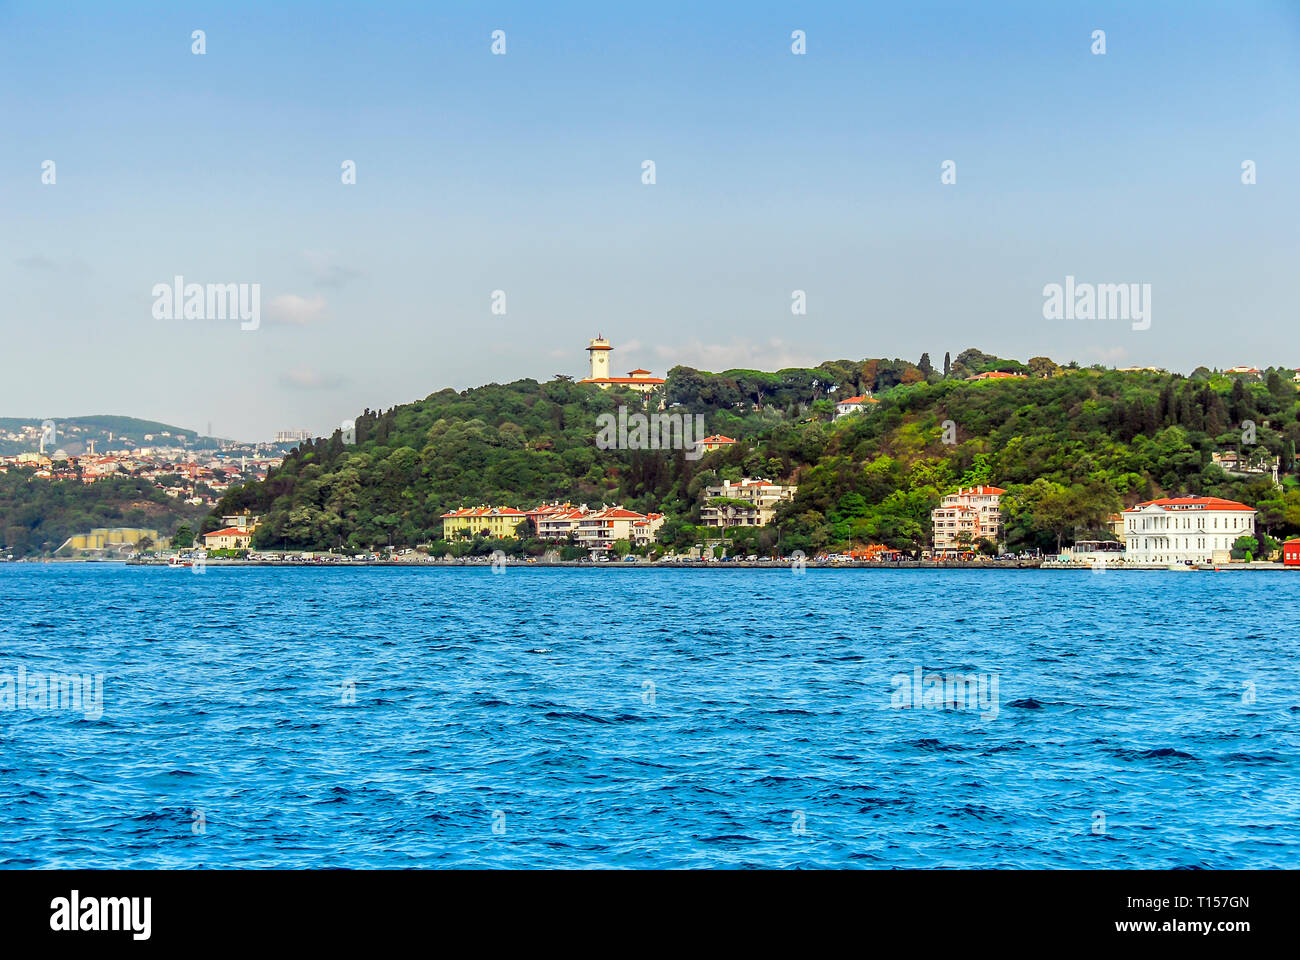 Istanbul, Turkey, 2 September 2007: Shores and Hidiv Palace of Beykoz district of Istanbul Stock Photo